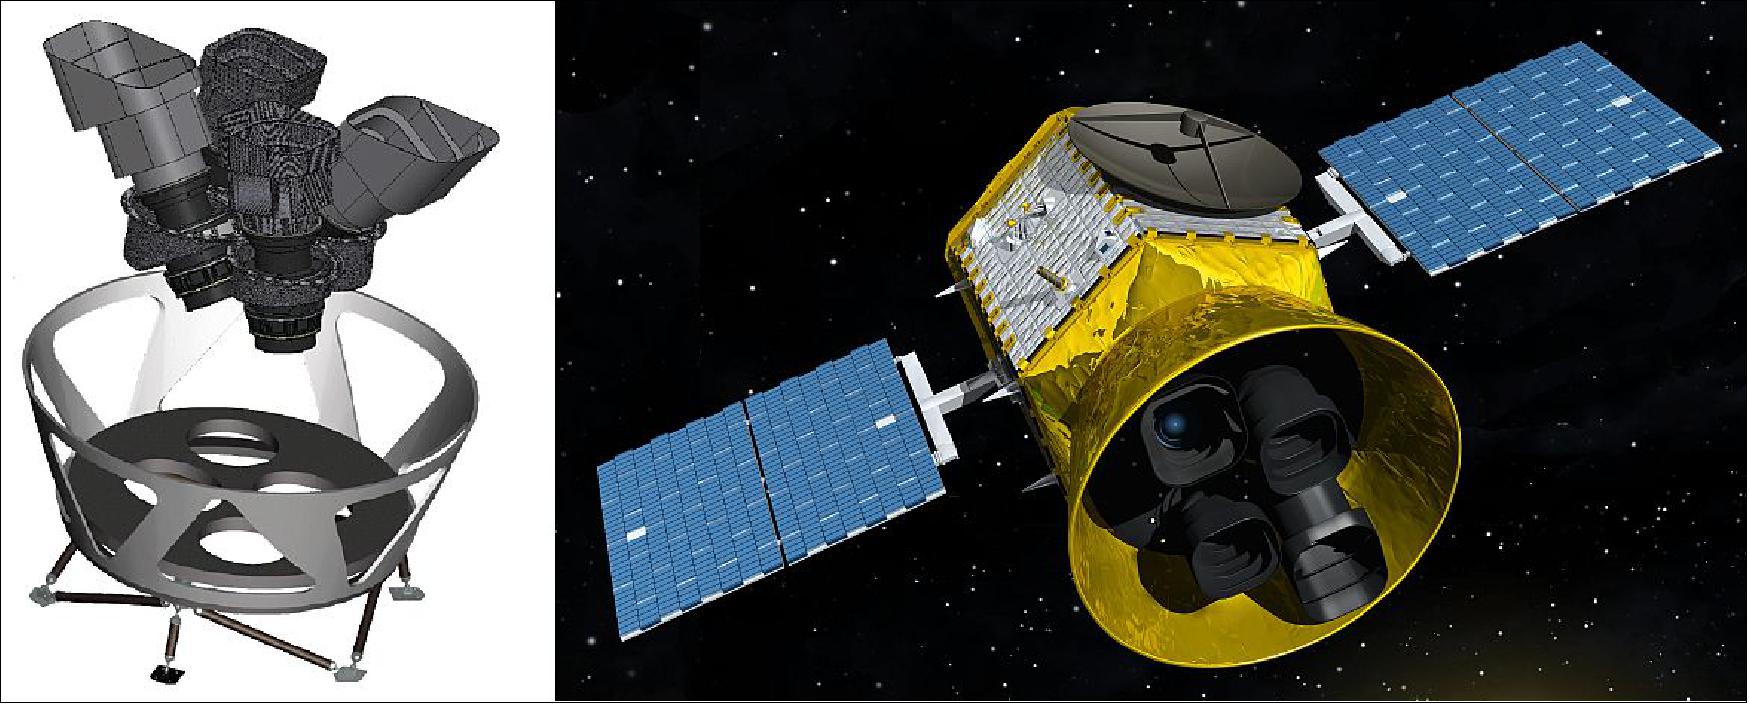 Figure 5: Left: Diagram illustrating the orientations of the four TESS cameras, lens hoods, and mounting platform. Right: Artist's conception of the TESS spacecraft and payload (image credit: Orbital ATK, TESS Team)